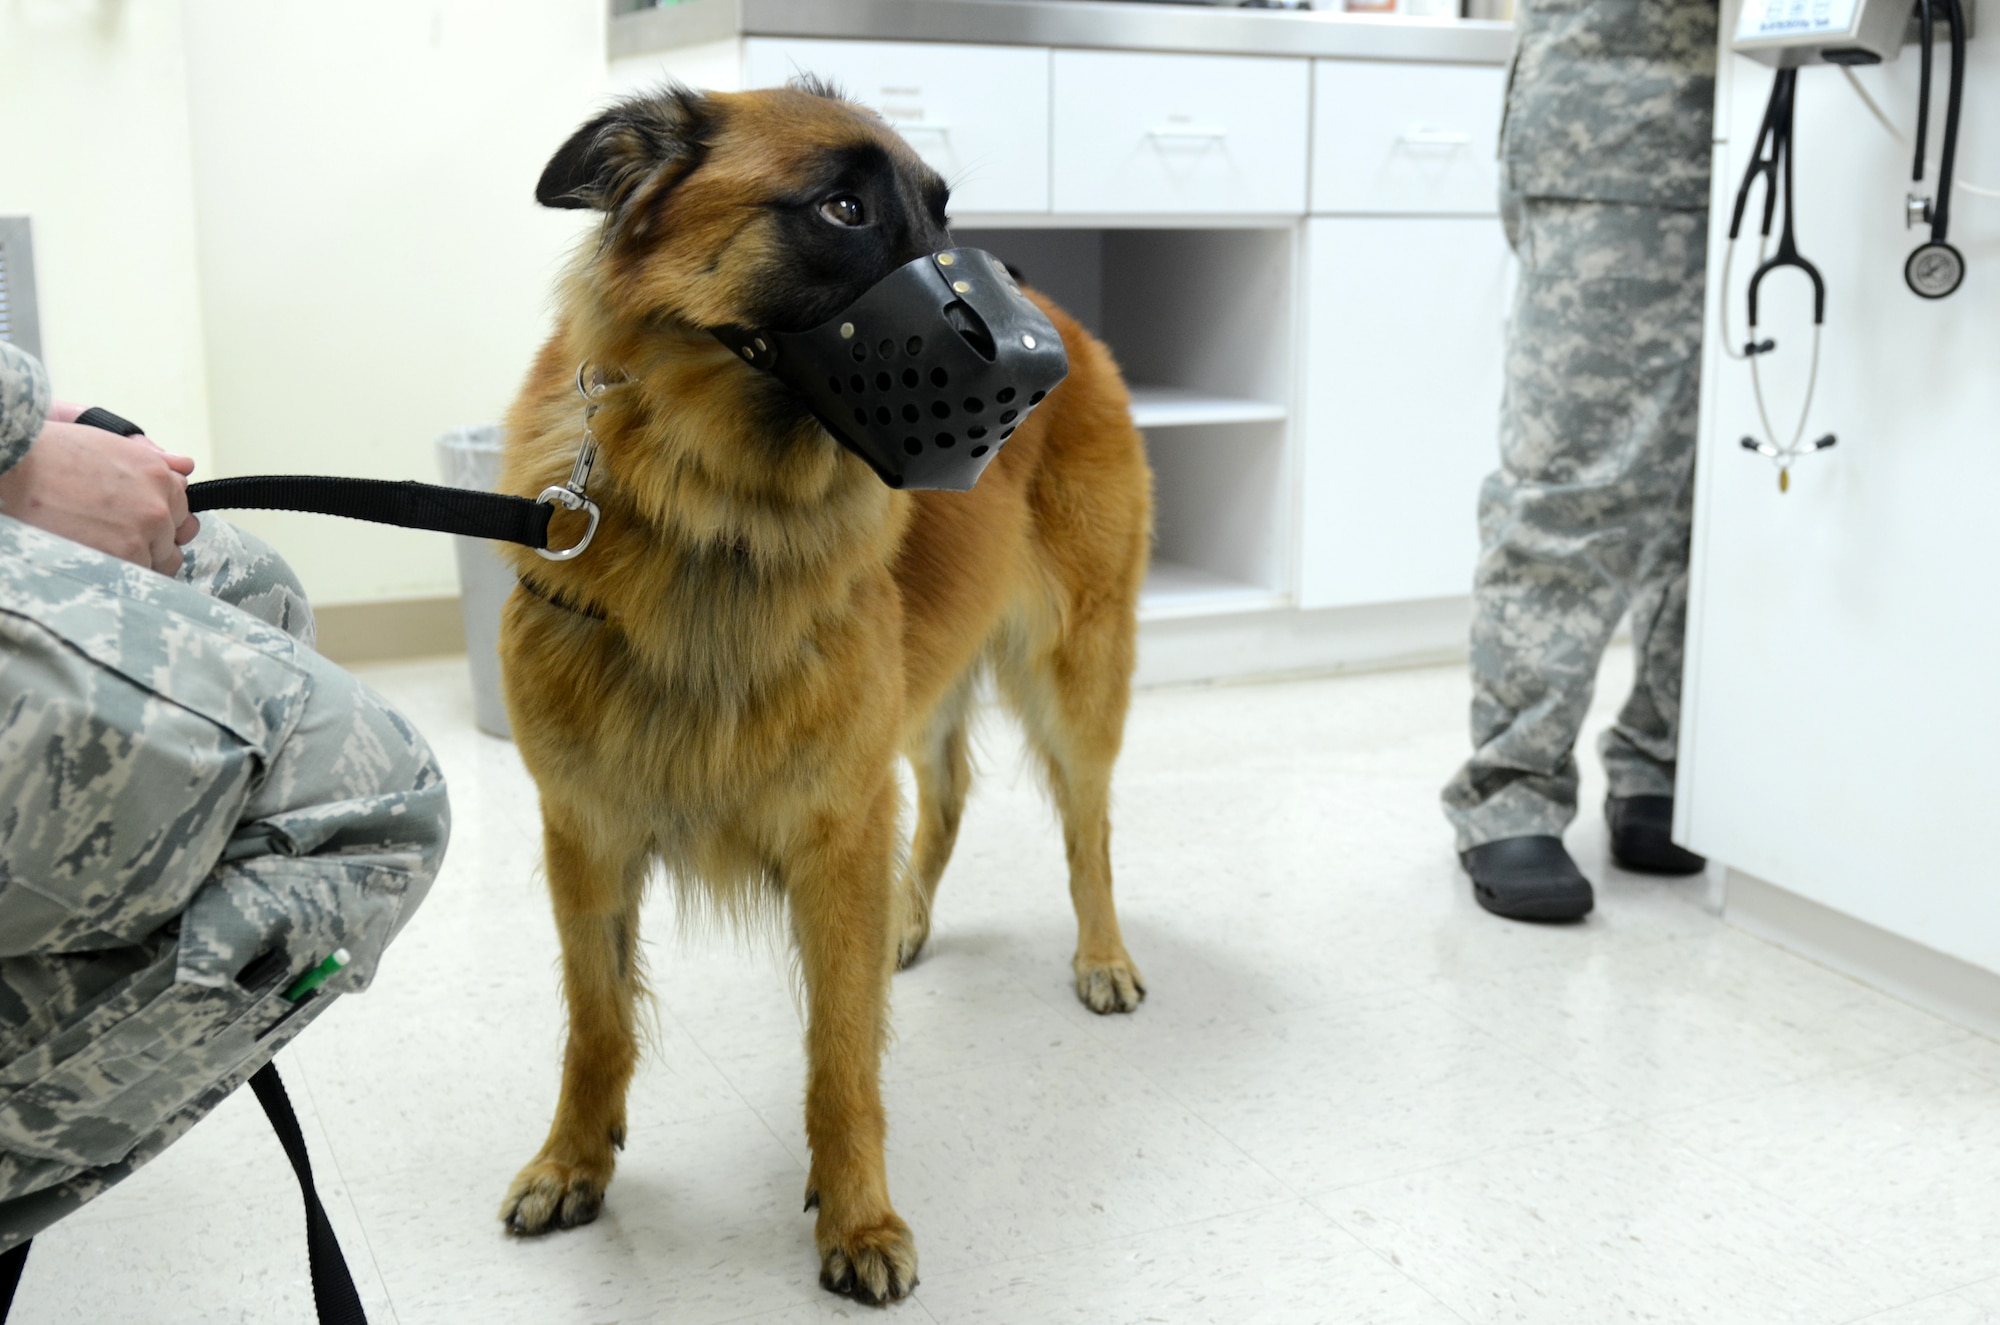 WWill, military working dog assigned to the 354th Security Forces Squadron at Eielson AFB, Alaska, visits the Andersen Air Force Base Veterinary Treatment Facility for an island entry exam July 8, 2015, at Andersen AFB, Guam. The facility provides veterinary services for MWDs, U.S. Department of Agriculture dogs and privately owned animals. (U.S. Air Force photo by Airman 1st Class Alexa Ann Henderson/Released)